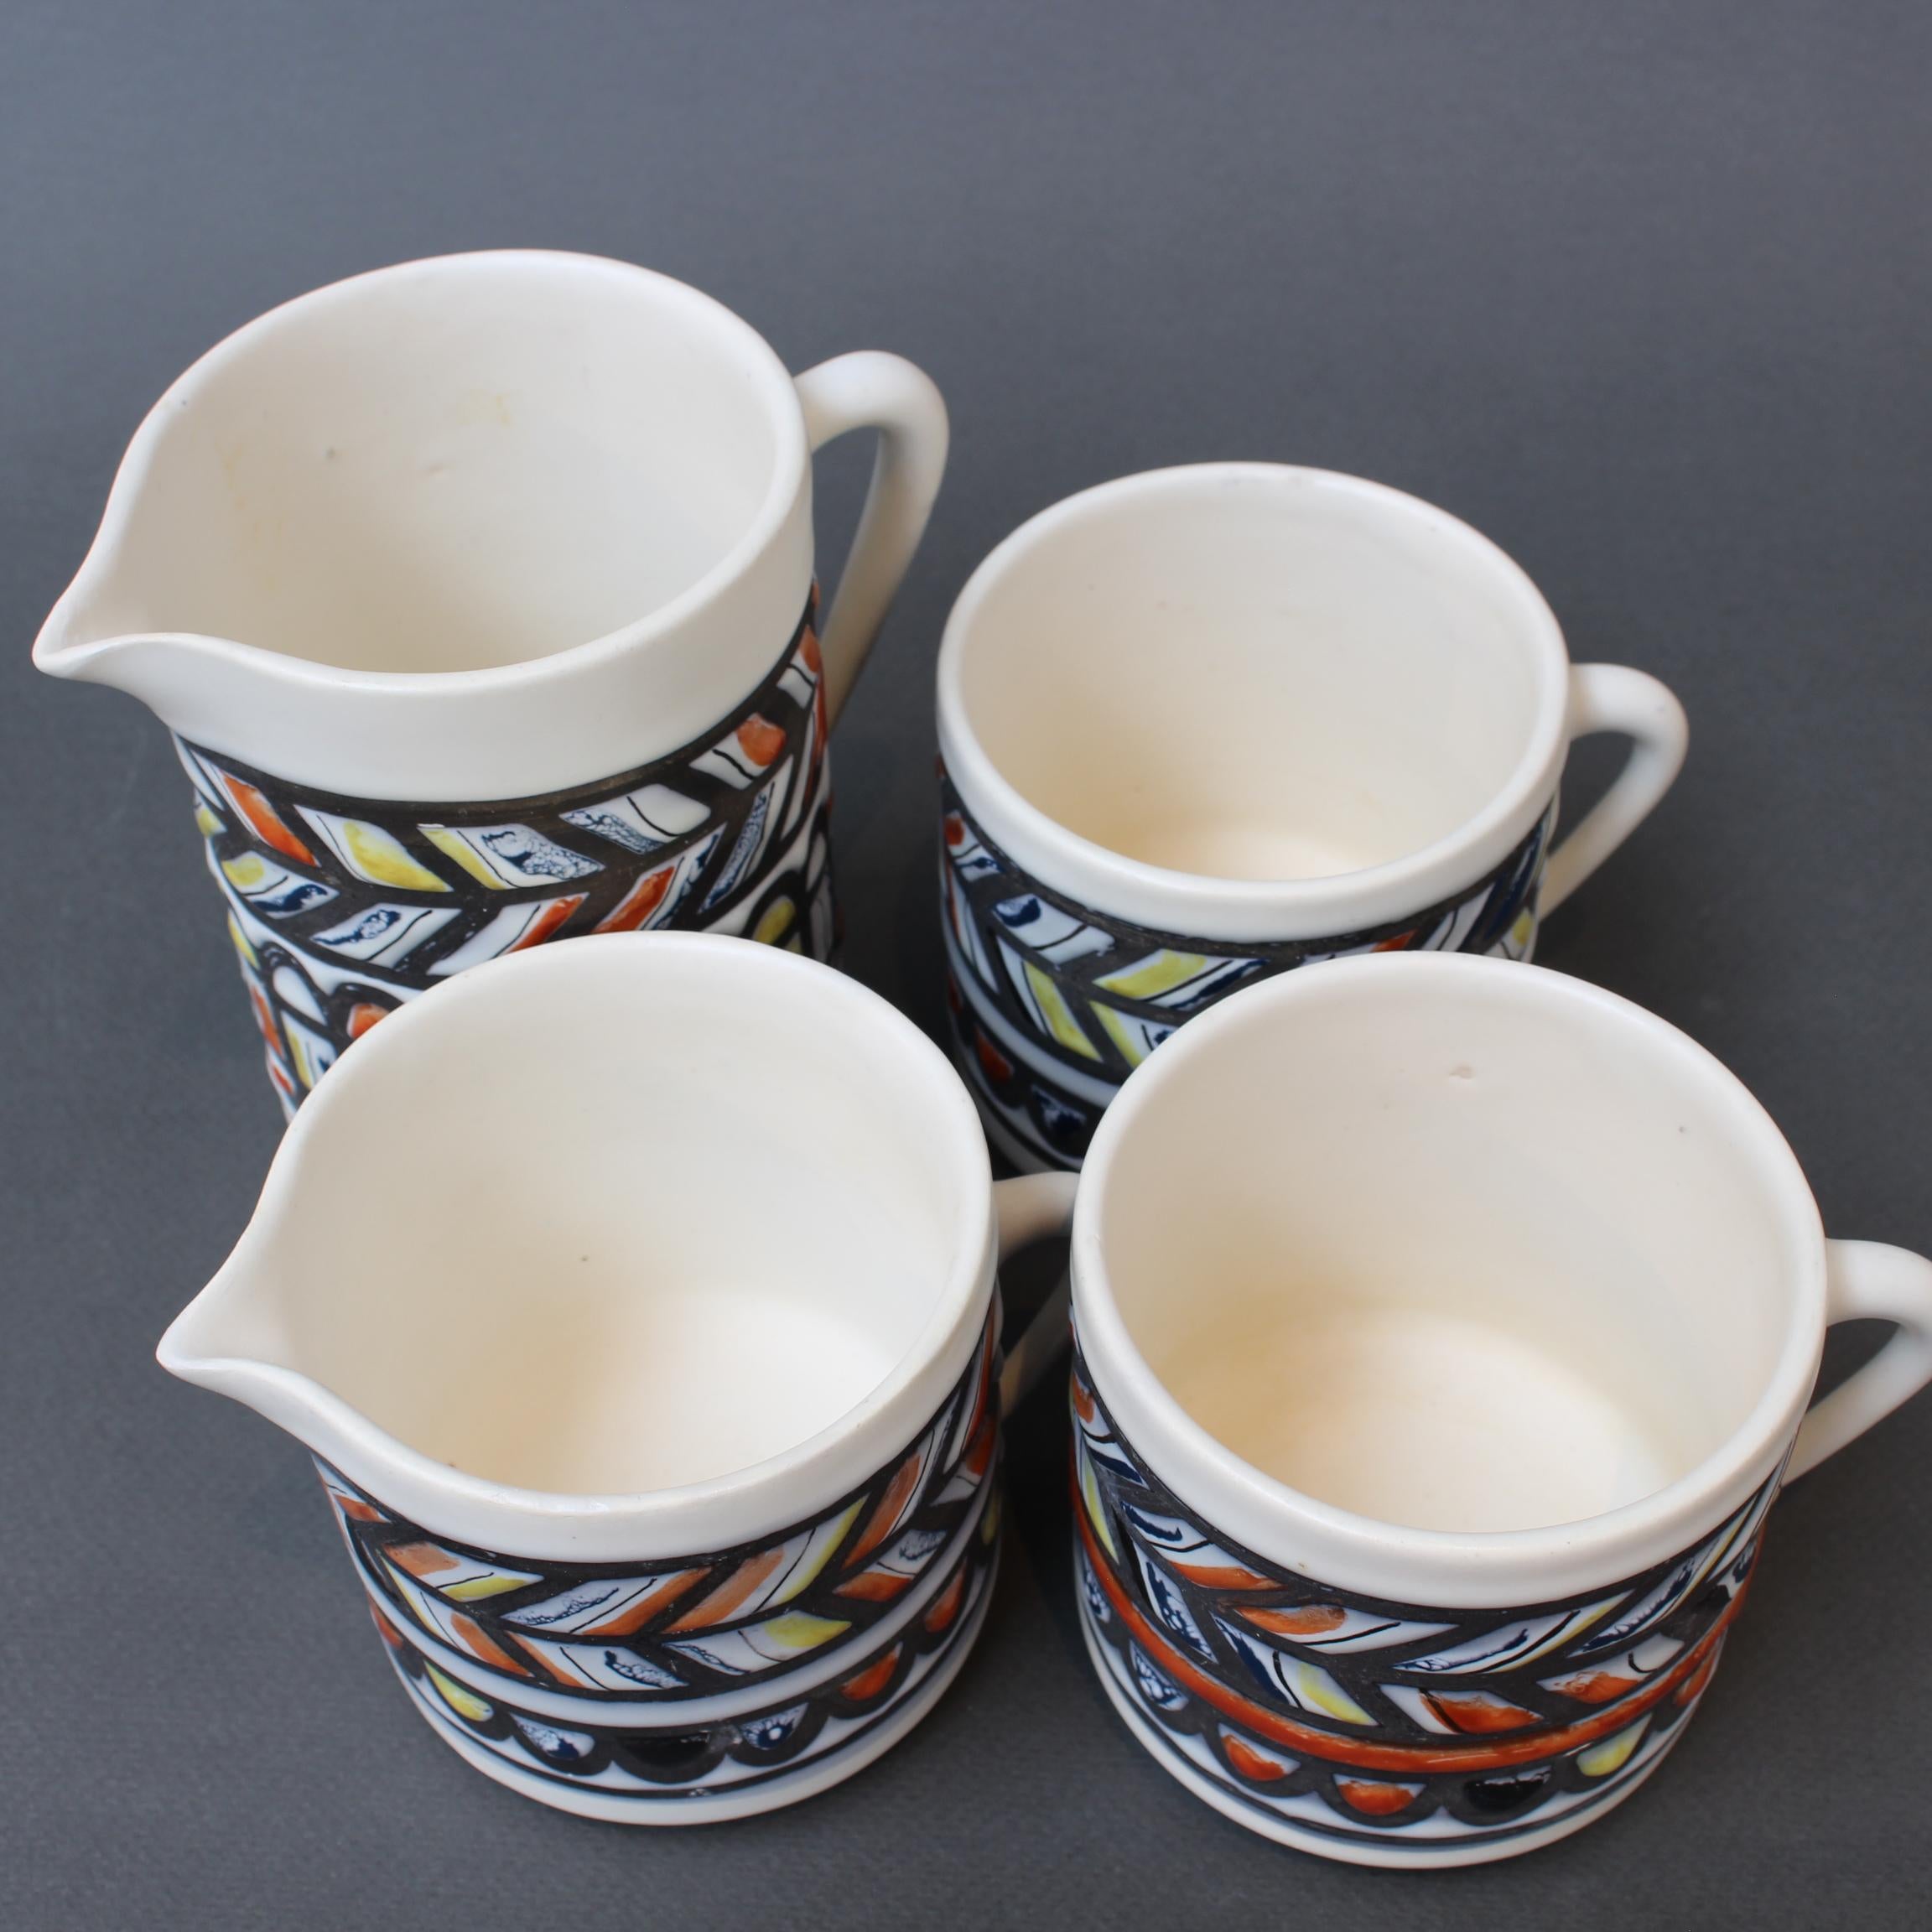 Vintage French Ceramic Set of Vessels by Roger Capron (circa 1960s) For Sale 6